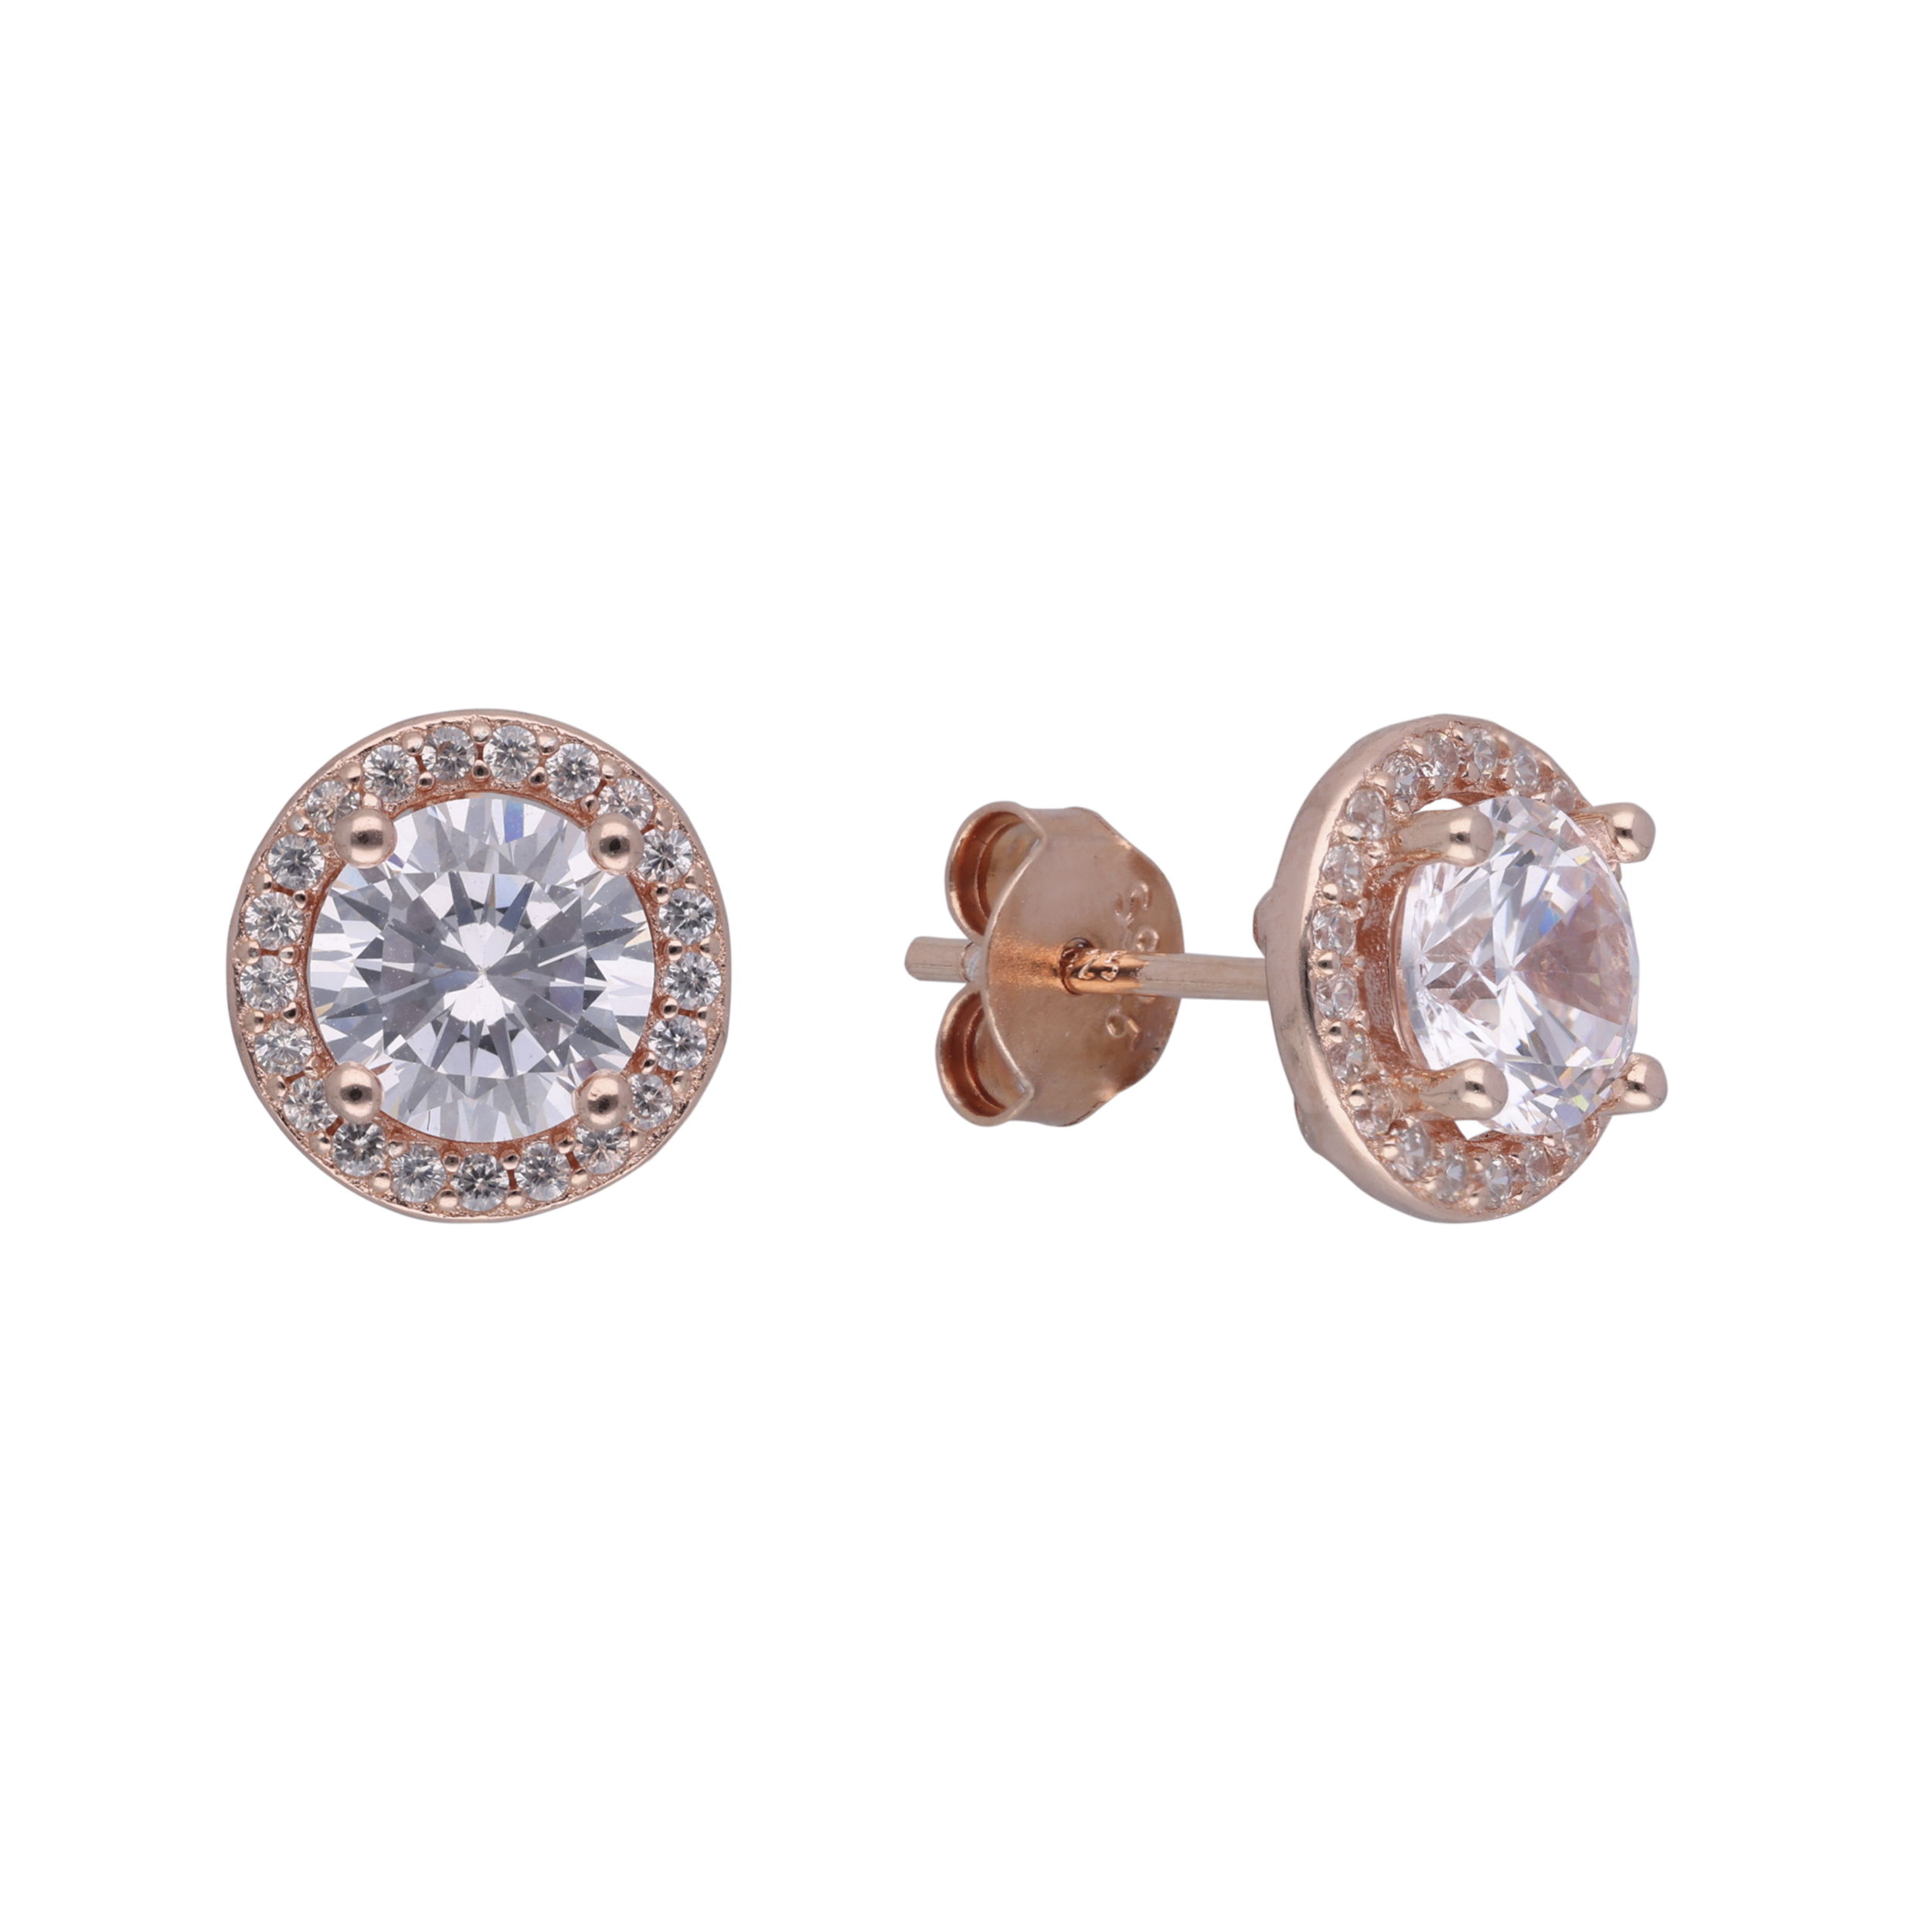 Timeless Sparkle: Solitaire Setting Sterling Silver Earstuds | SKU : 0019890609, 0019890623, 0019883960, 0019890616, 0019890630, 0003114193